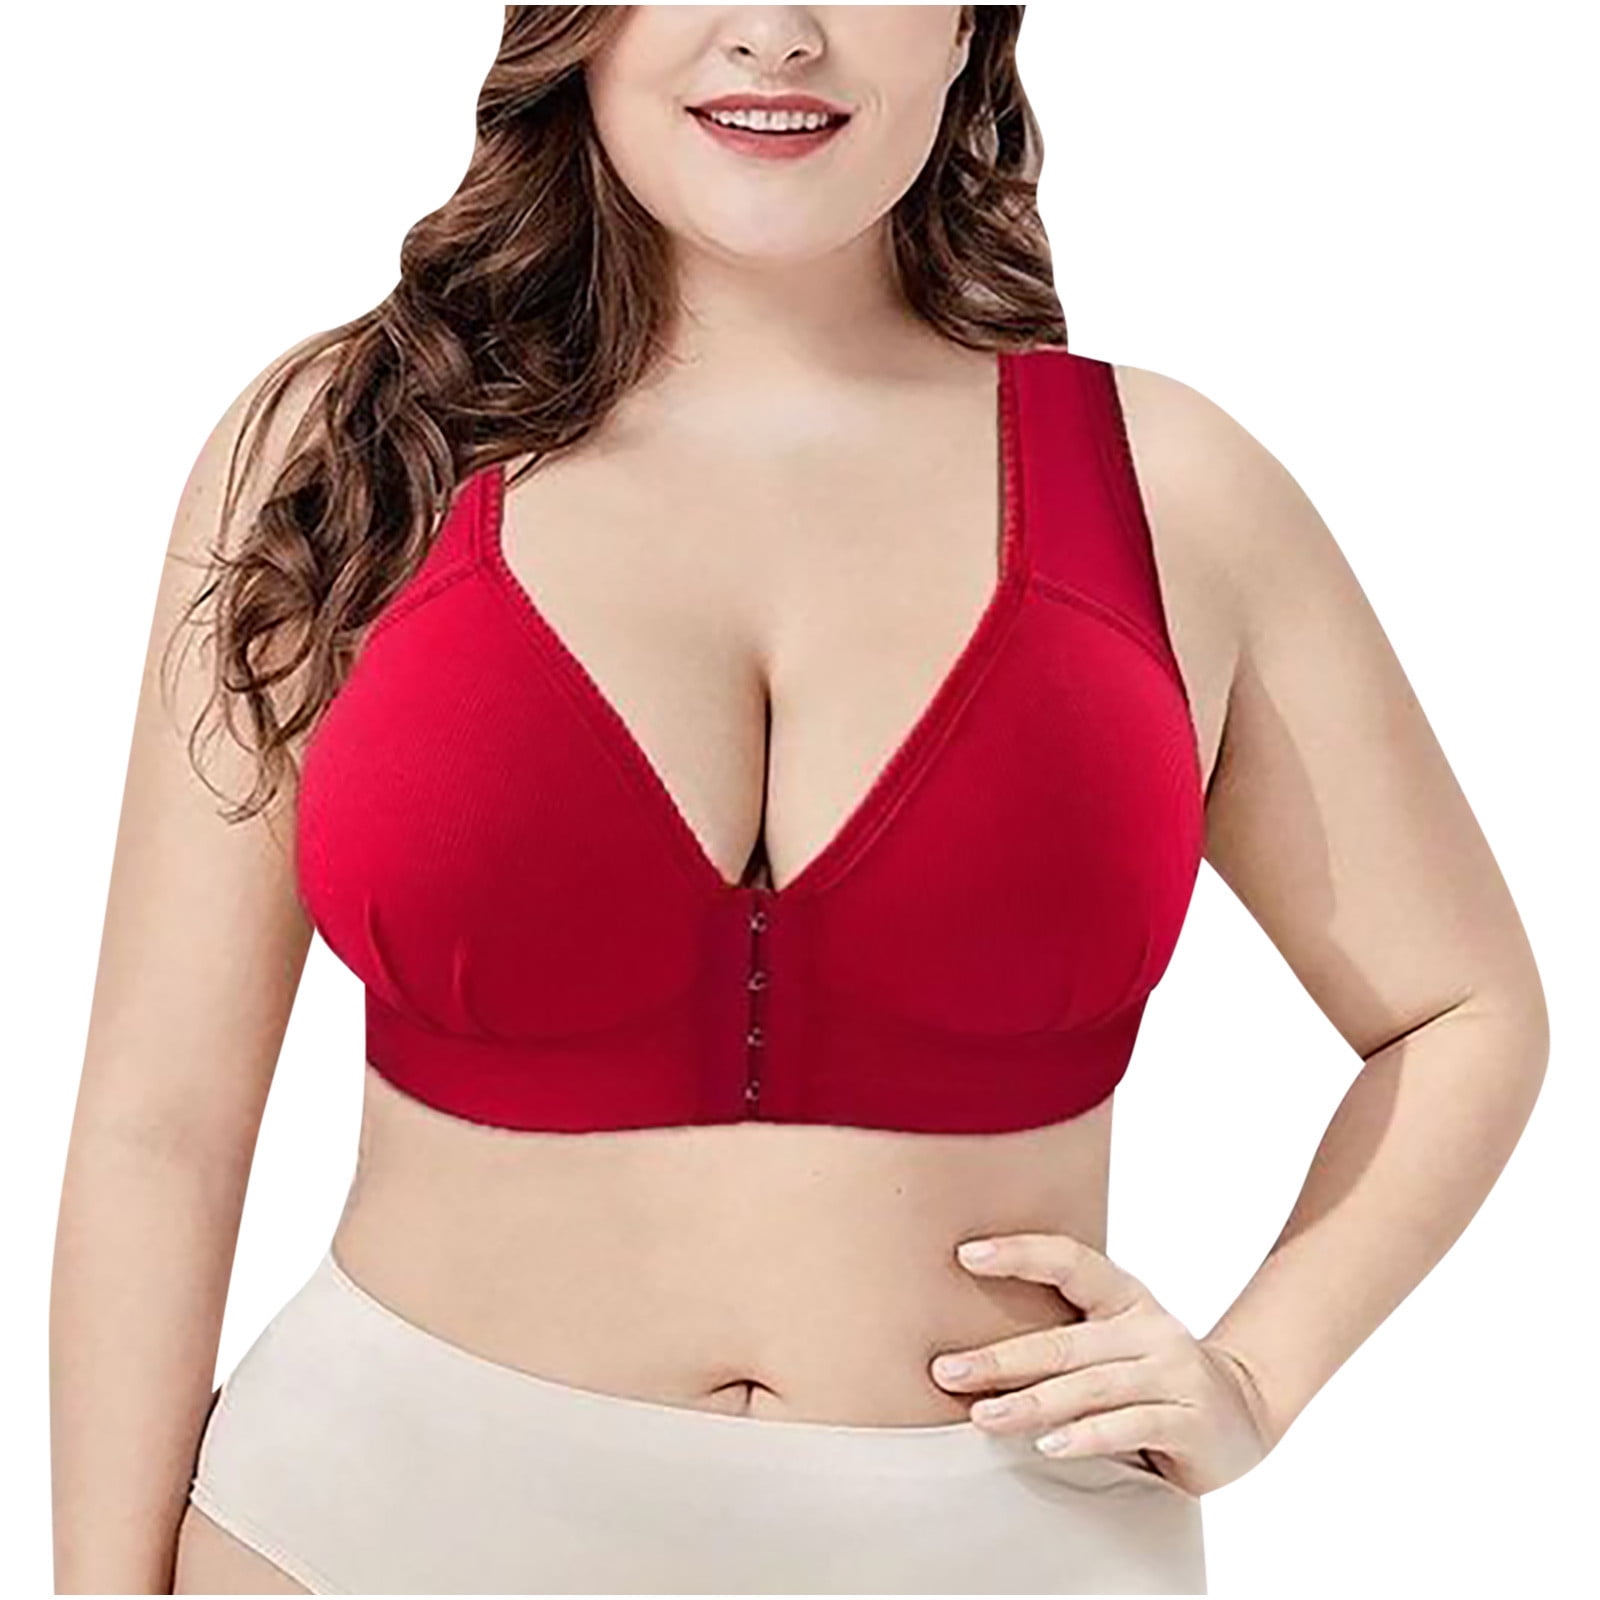 Imported Soft Foam Sexy Hot Look Classic Padded Push Up Bra for girls and  women